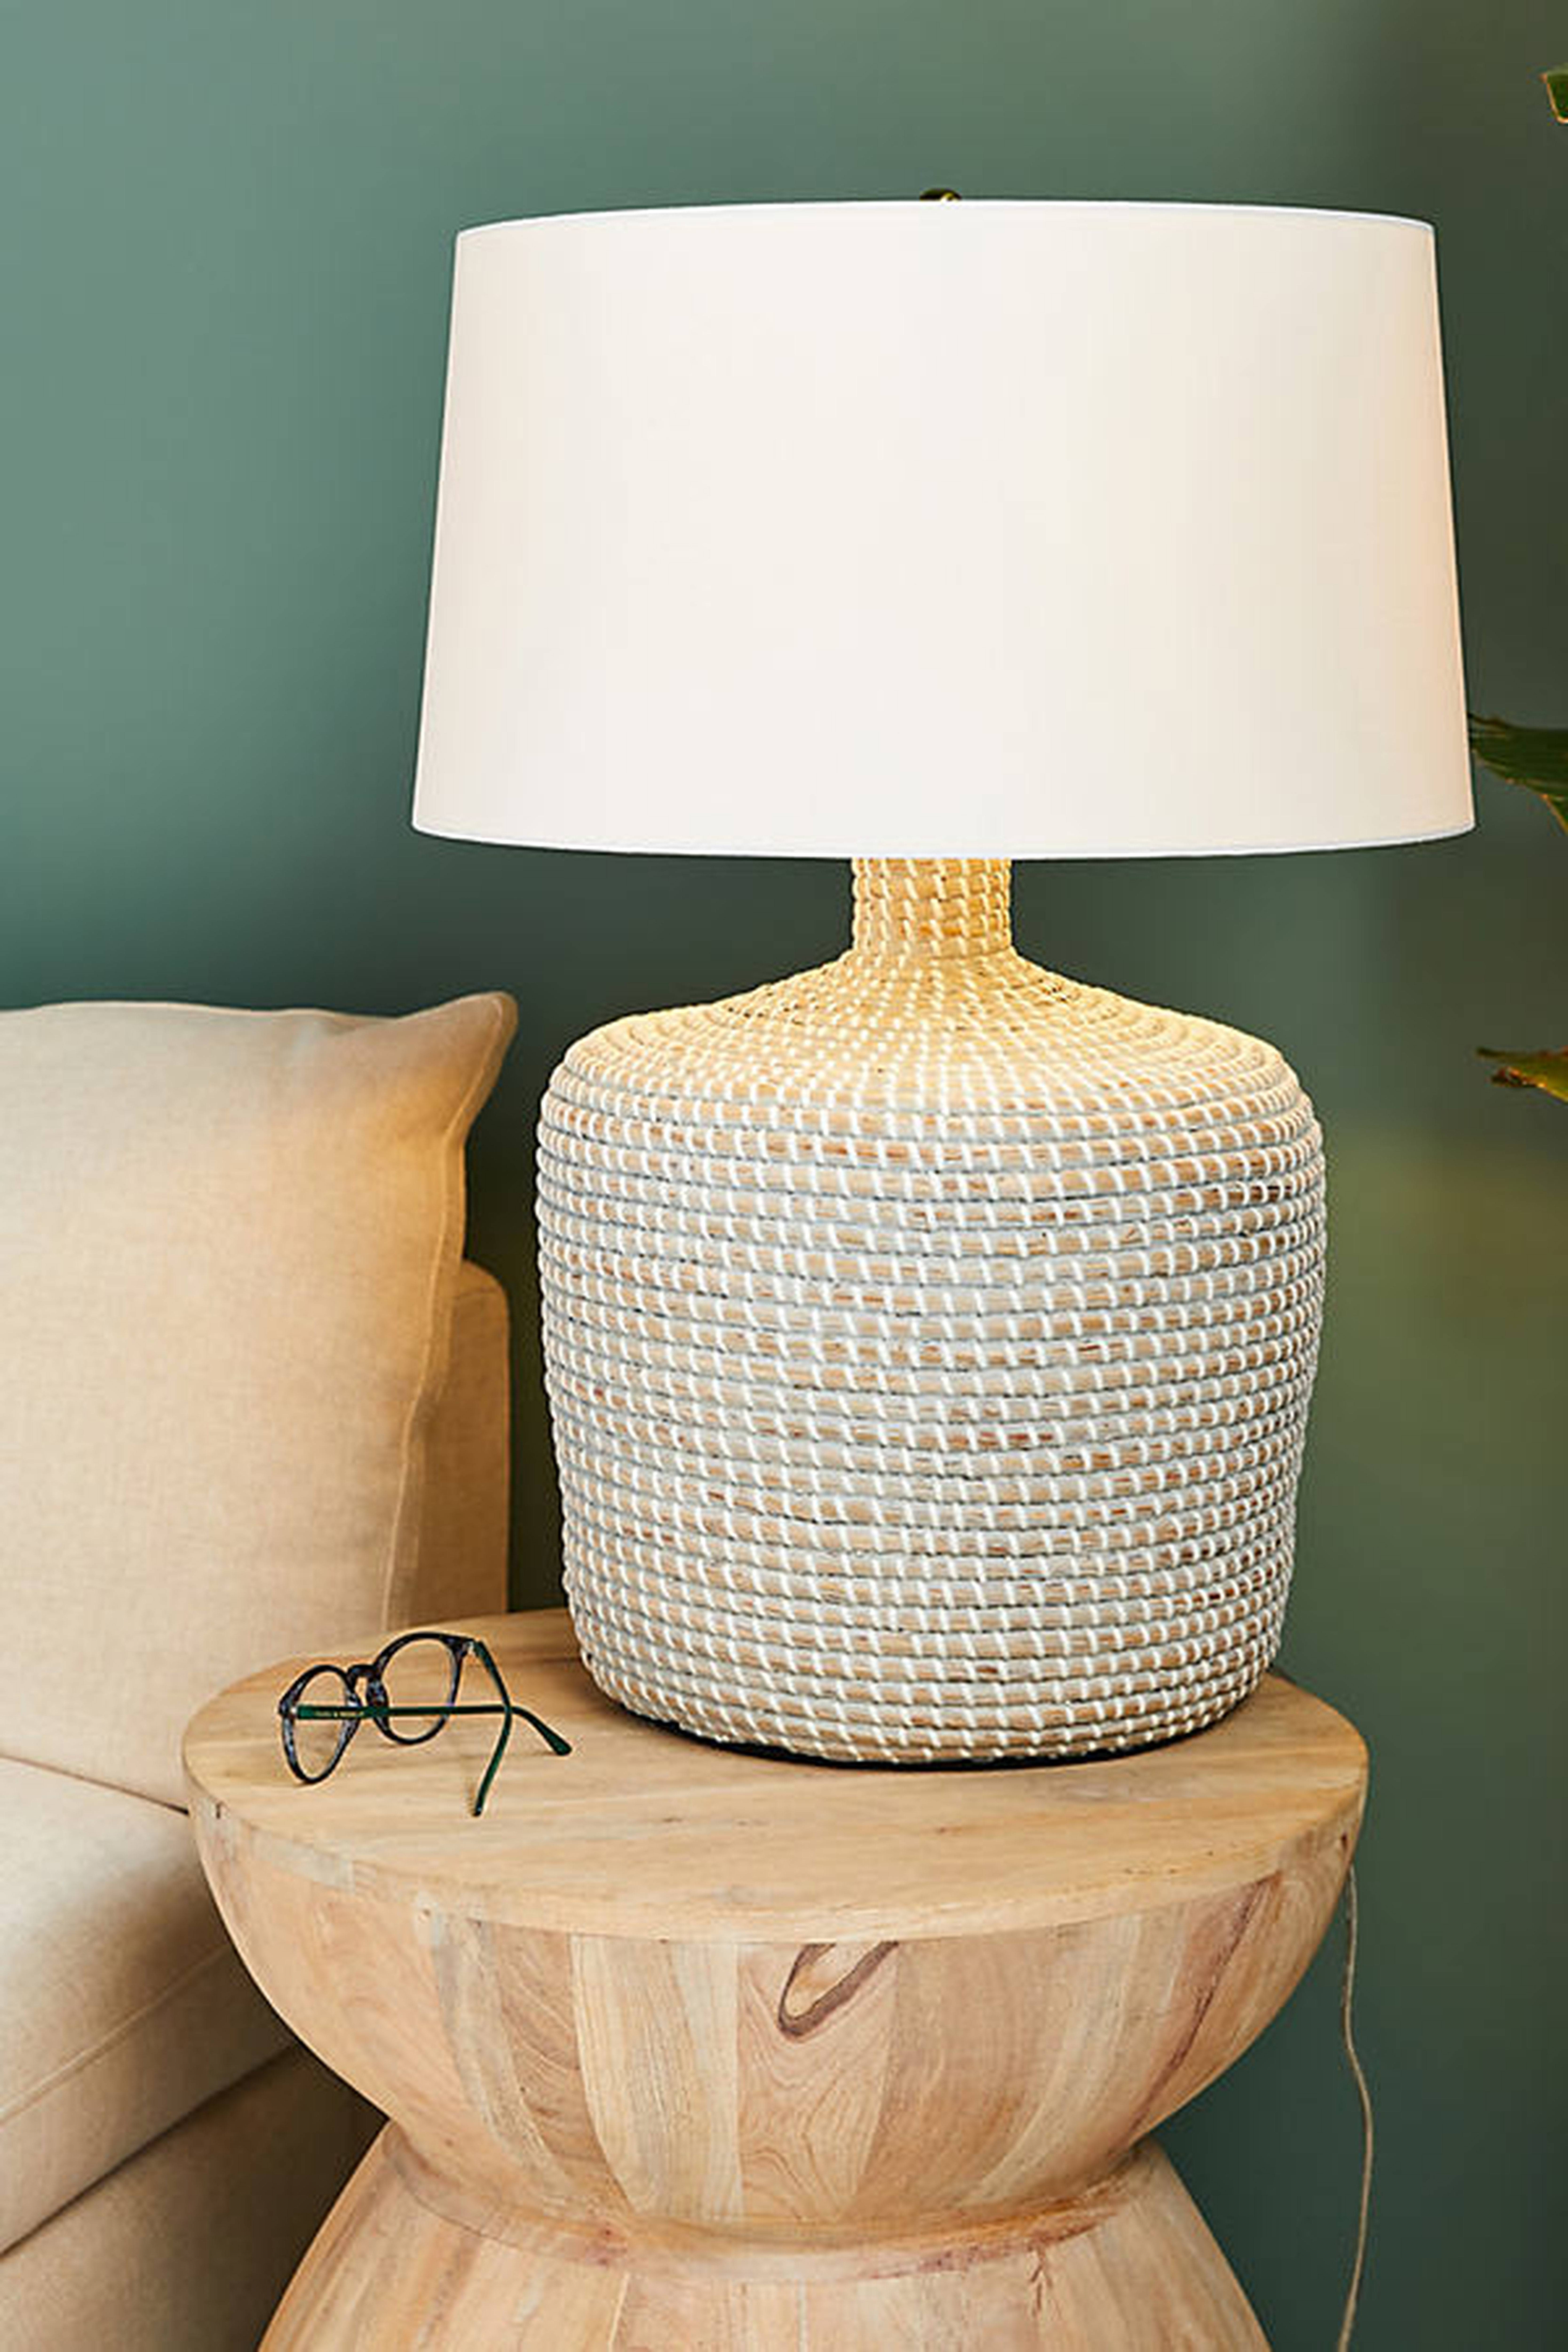 Lauren Rattan Table Lamp By Anthropologie in White - Anthropologie